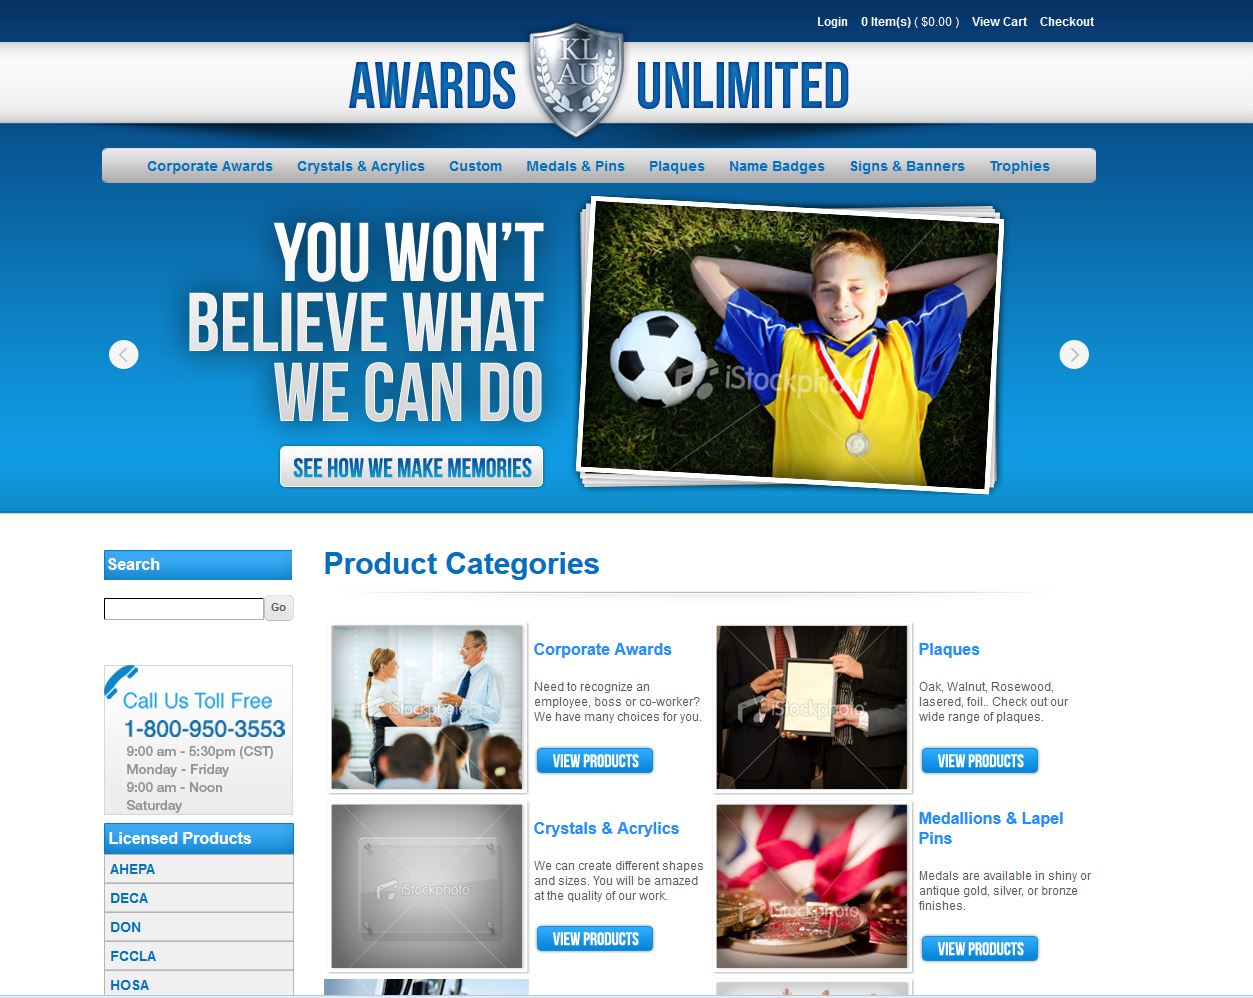 Awards Unlimited Site Launch